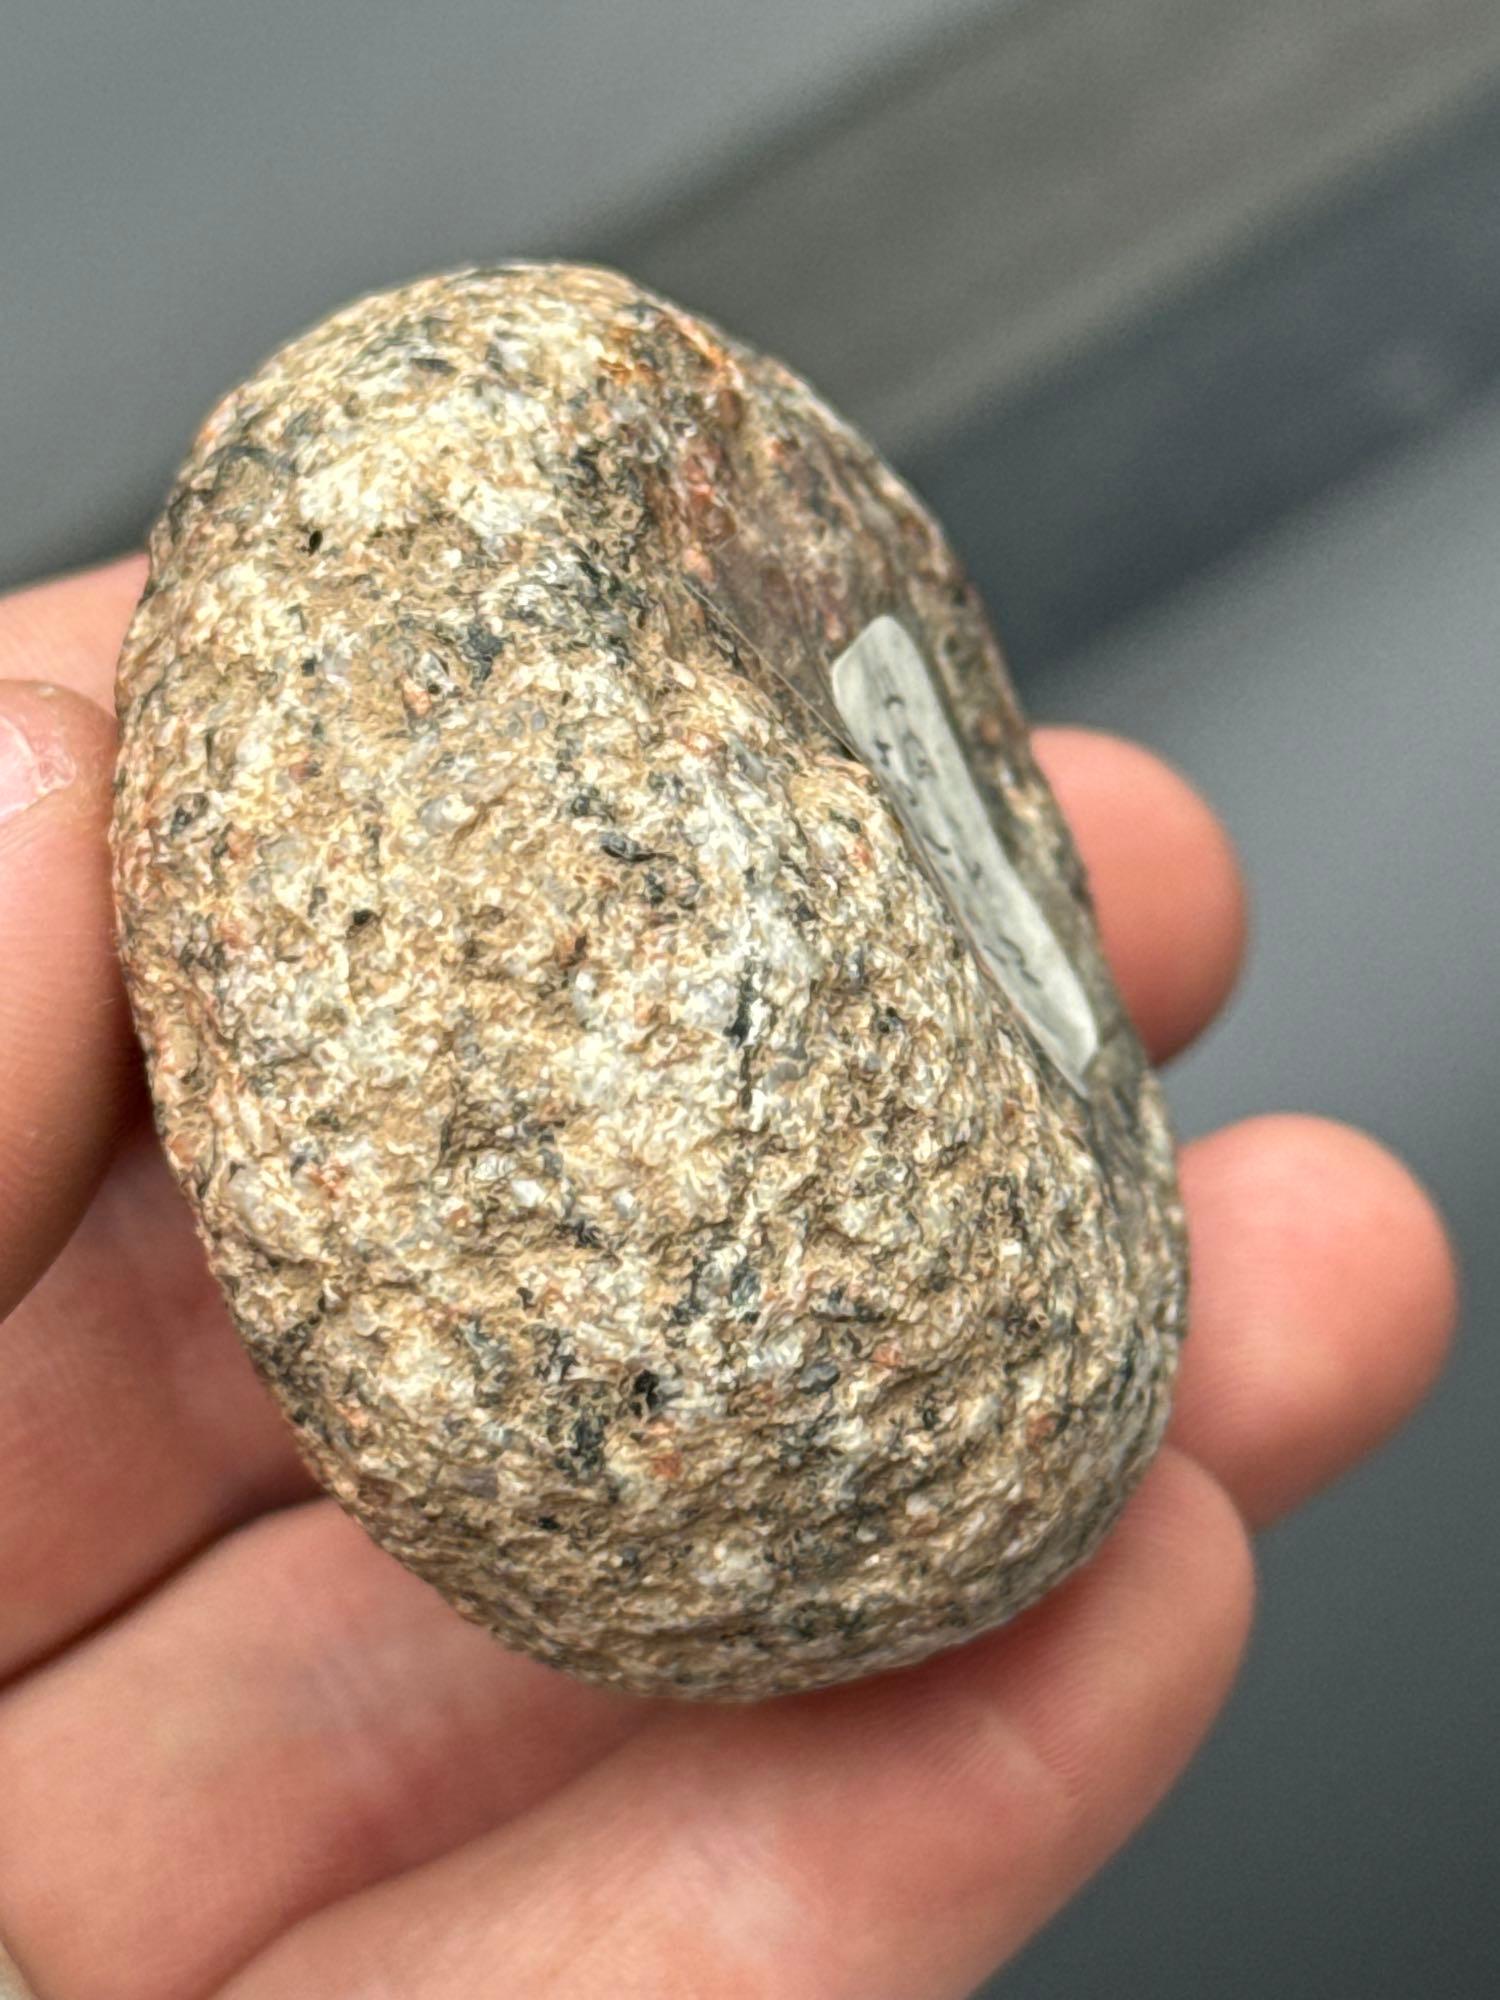 2 1/8" Diameter Granite Double Cupped Discoidal, Found in New Jersey